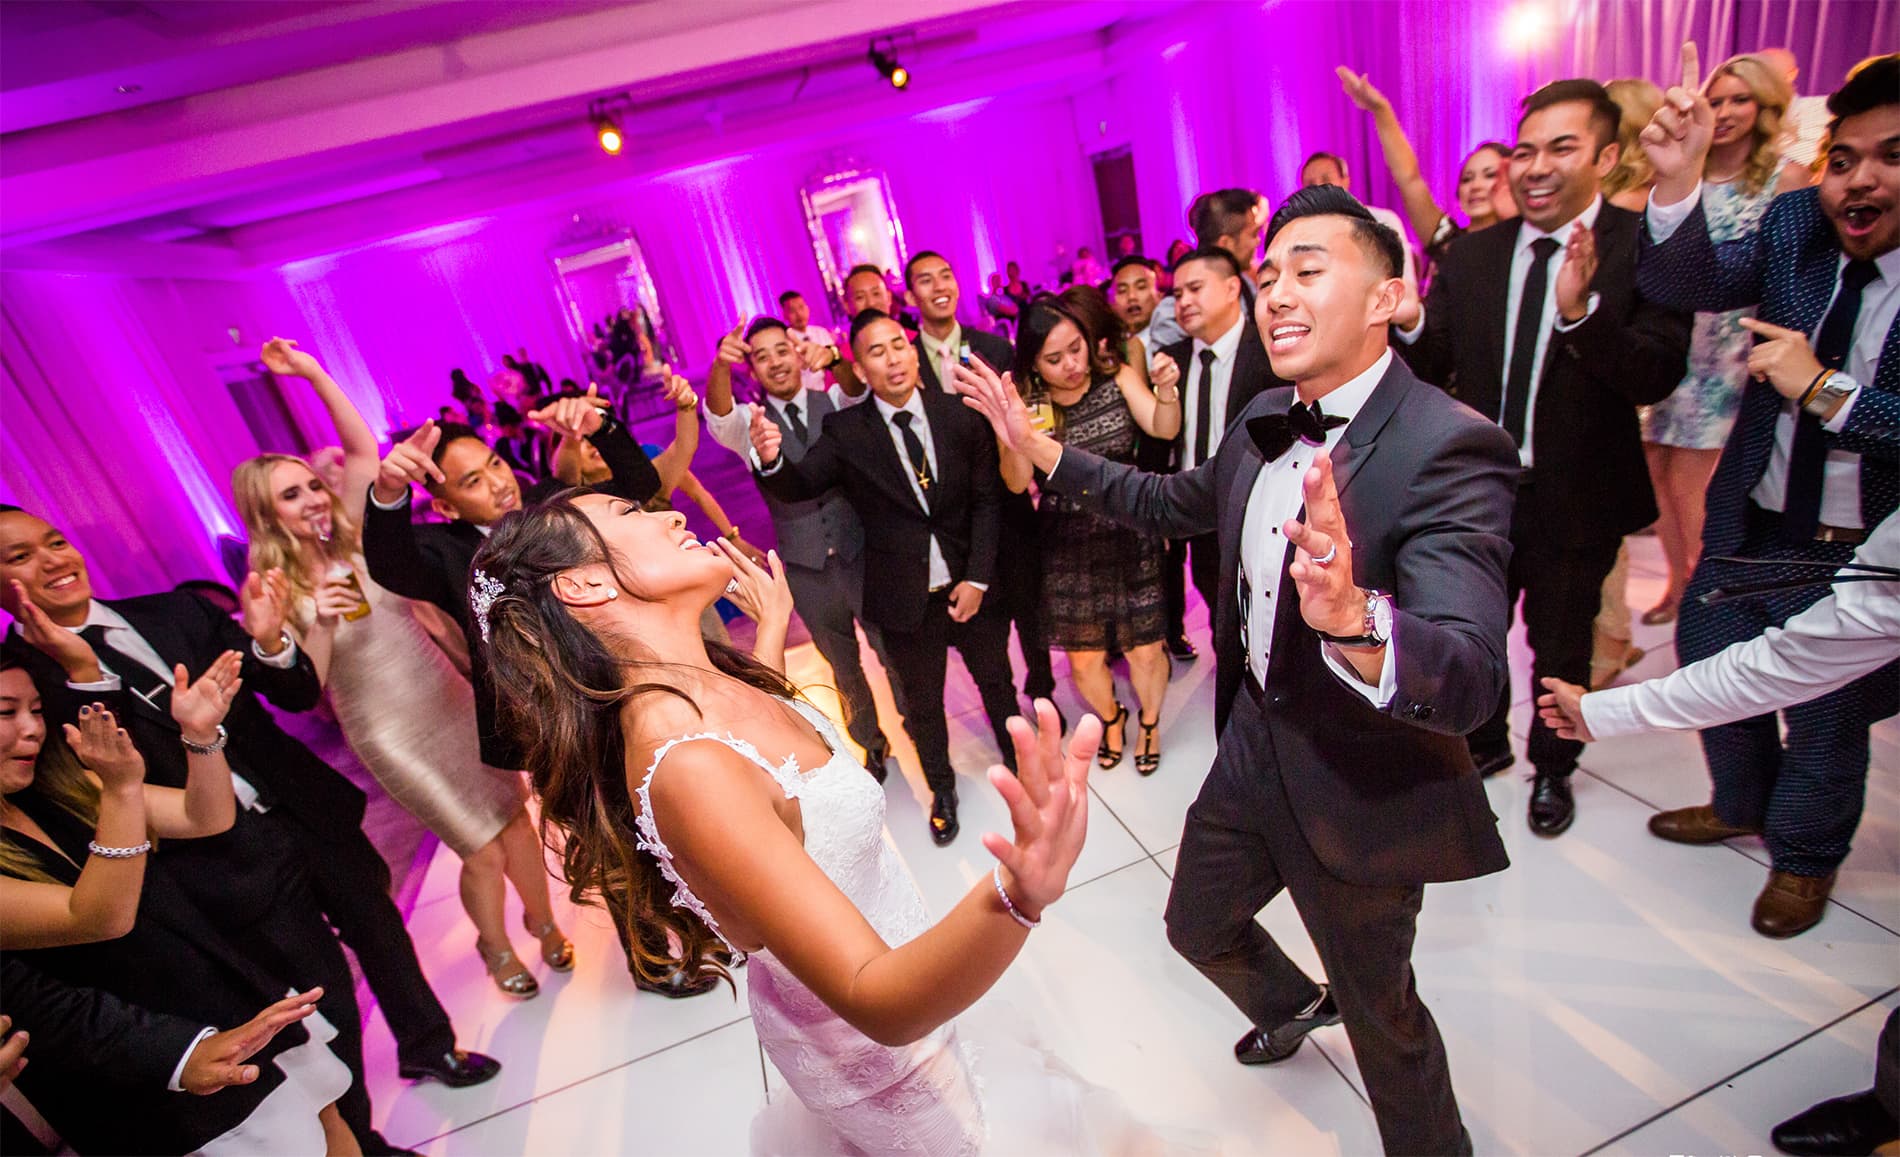 The Best Entrance Songs For Your Wedding Reception